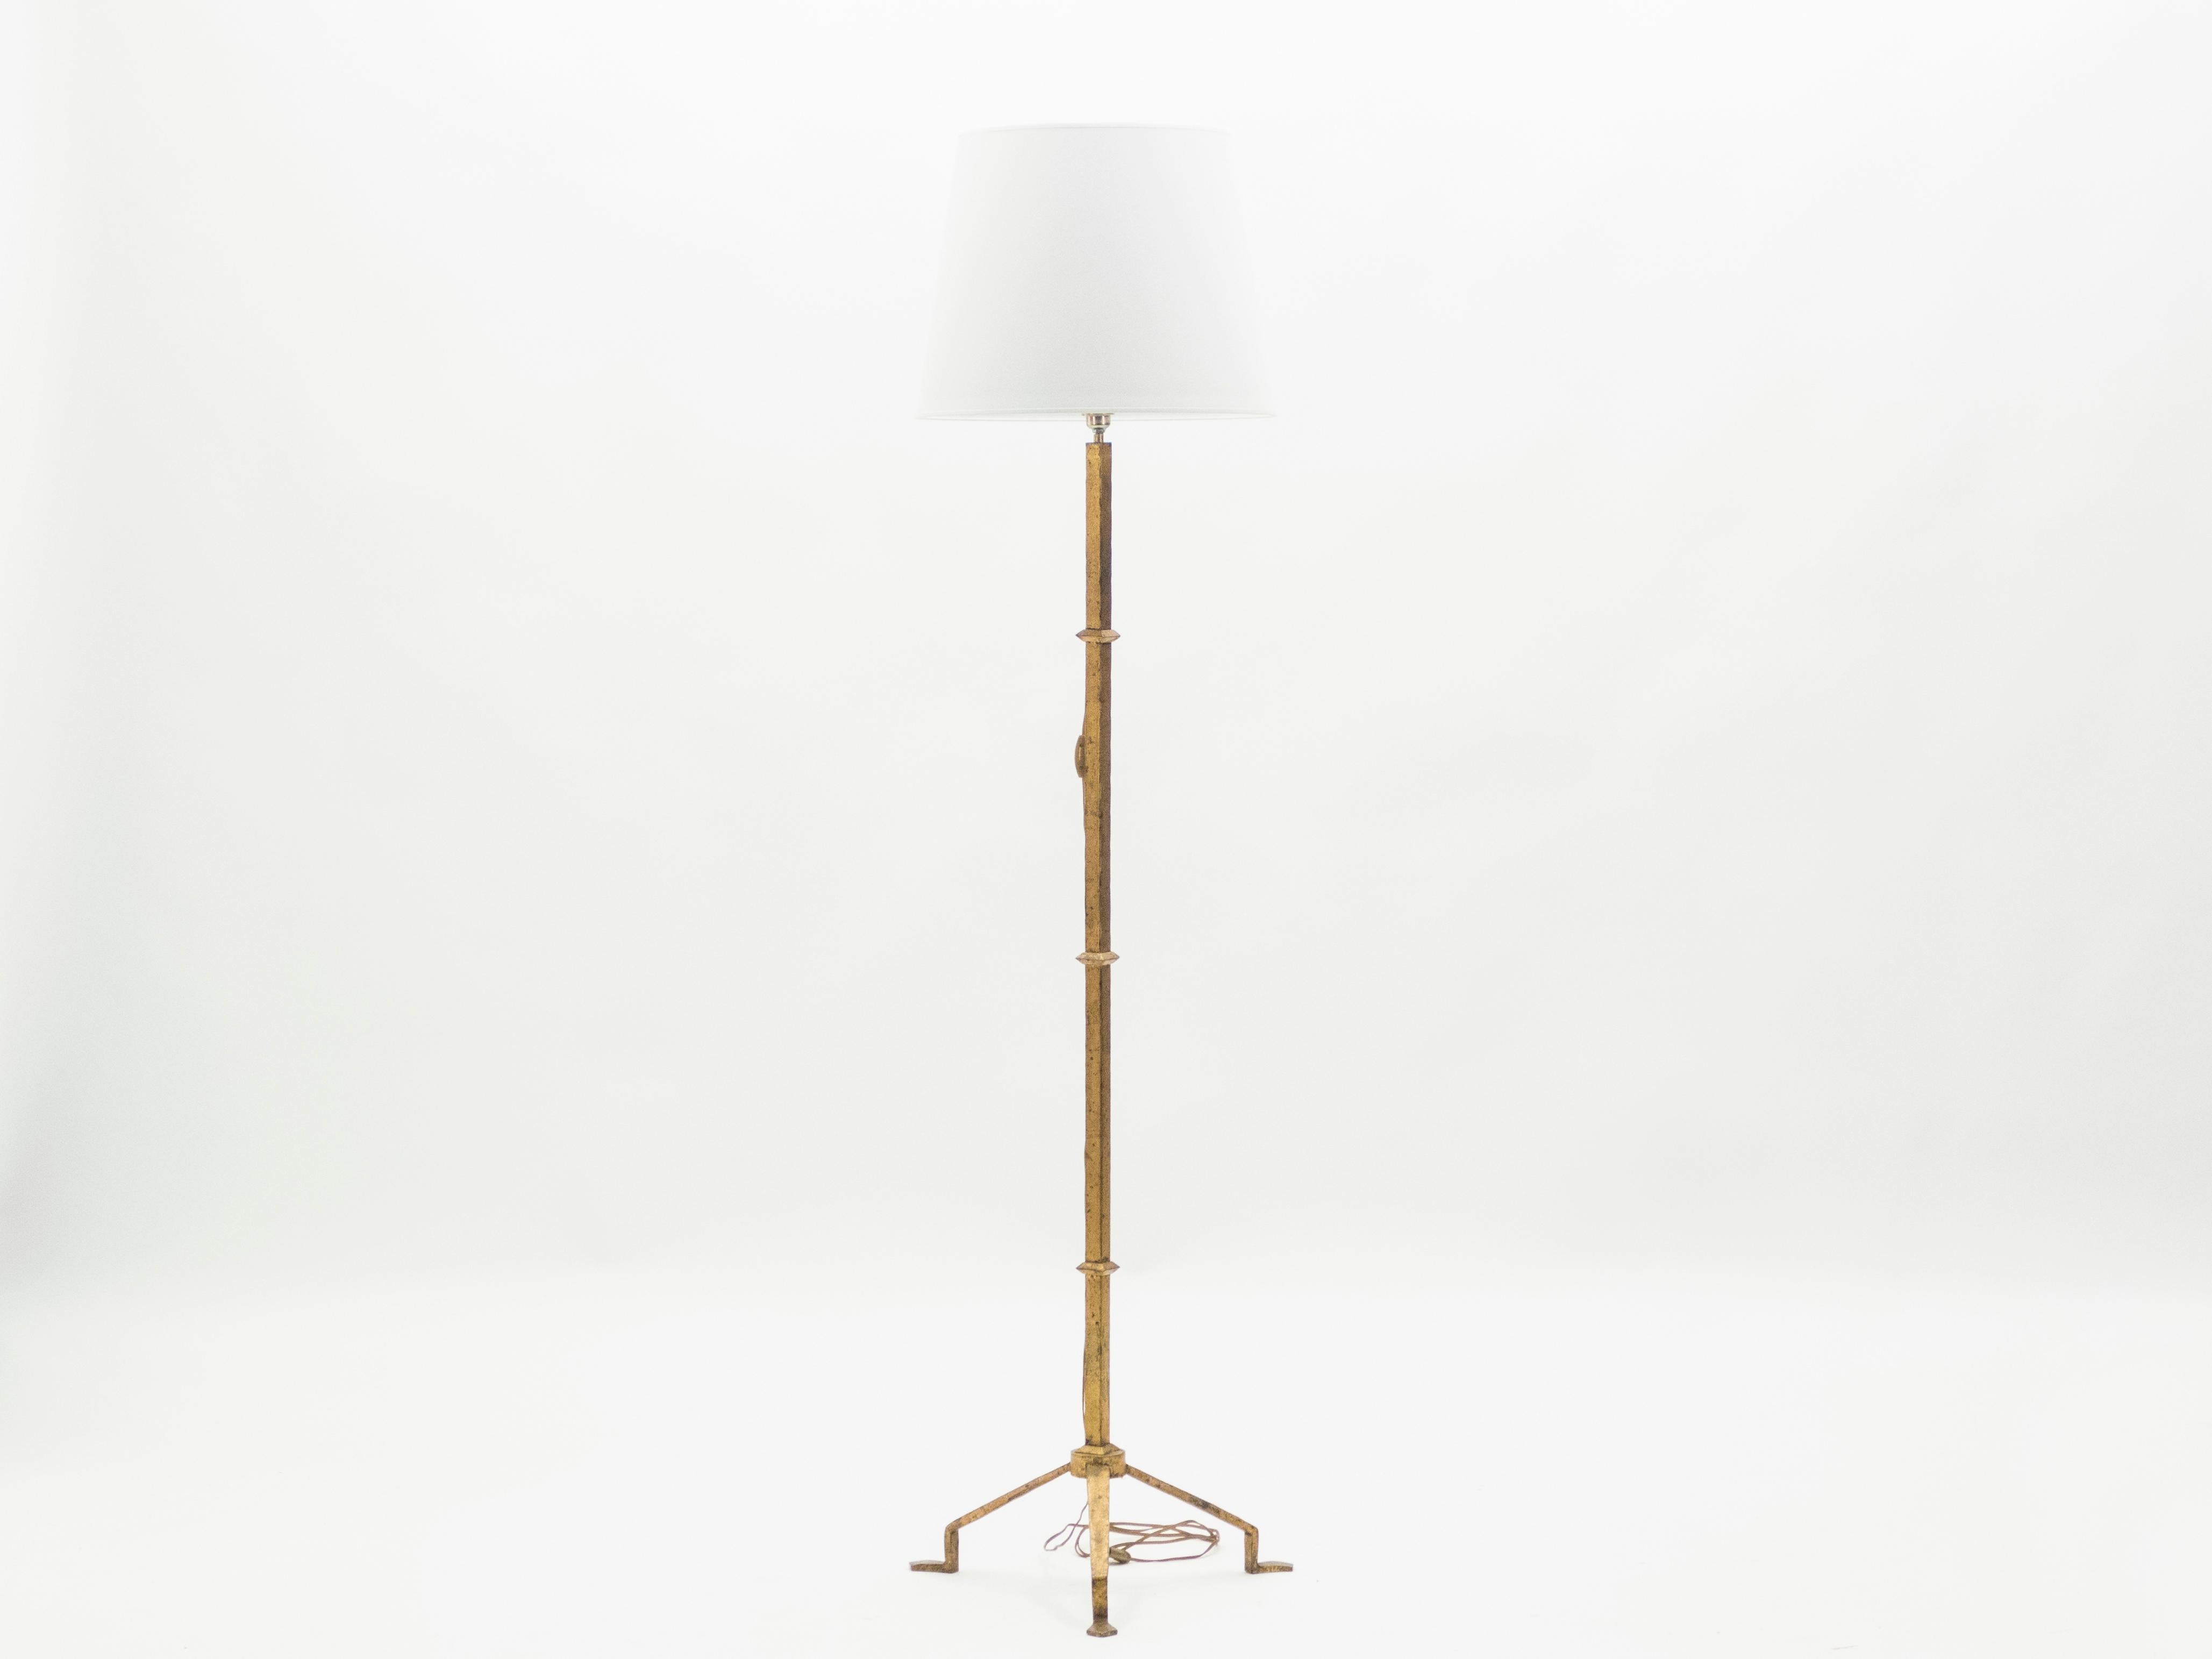 A strategically sparse design with high quality materials gives this rare floor lamp all its appeal. Wrought iron has been gilded with gold leaf for a gentle warm golden patina throughout the entire structure. Designed by Parisian decorators and